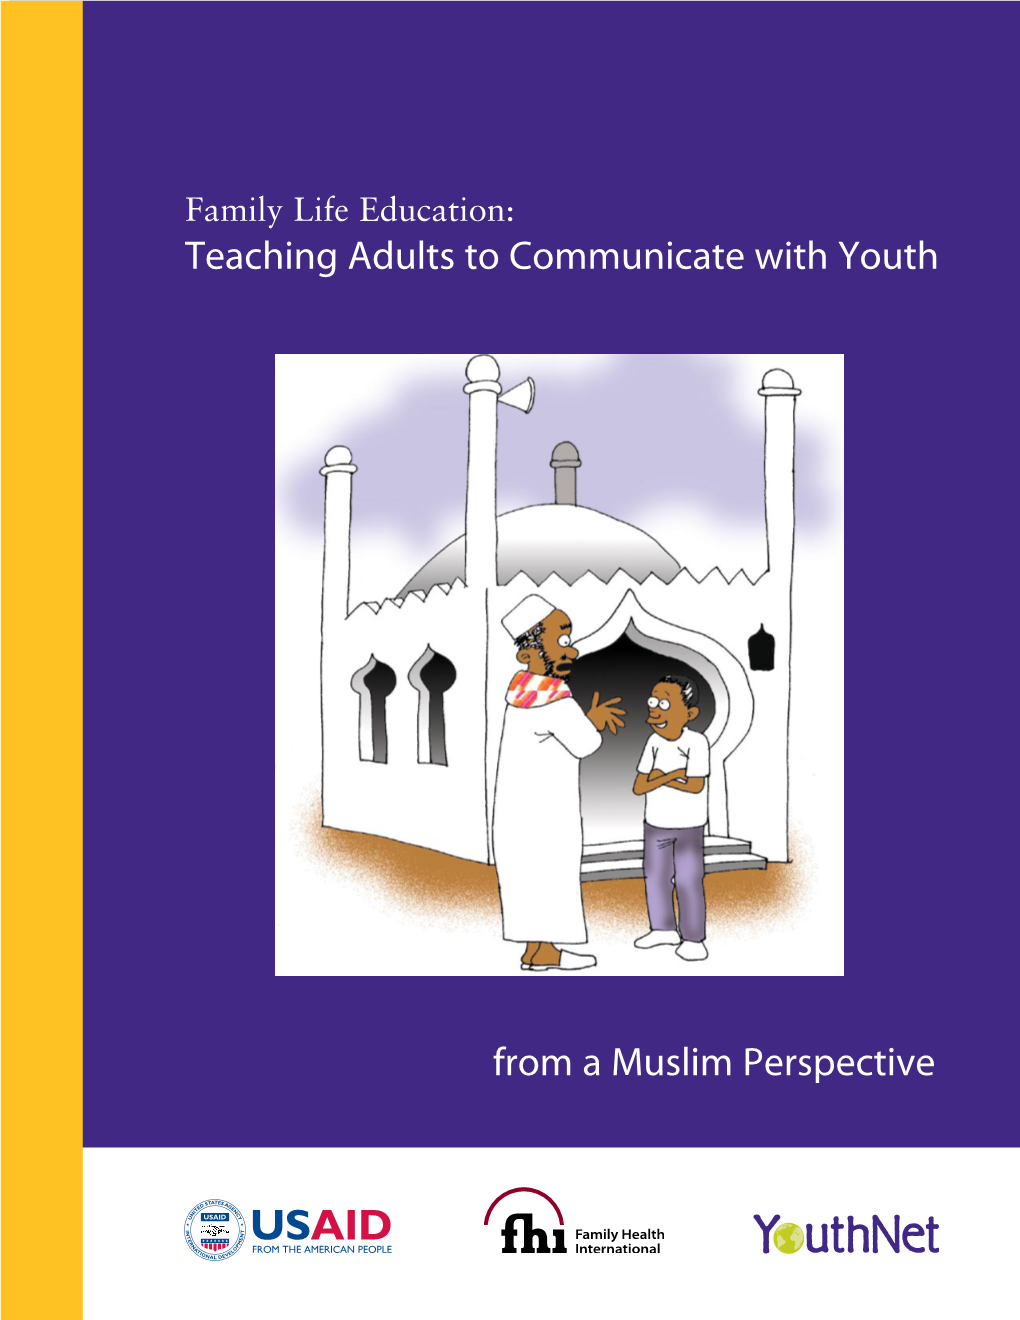 Family Life Education: Teaching Adults to Communicate with Youth